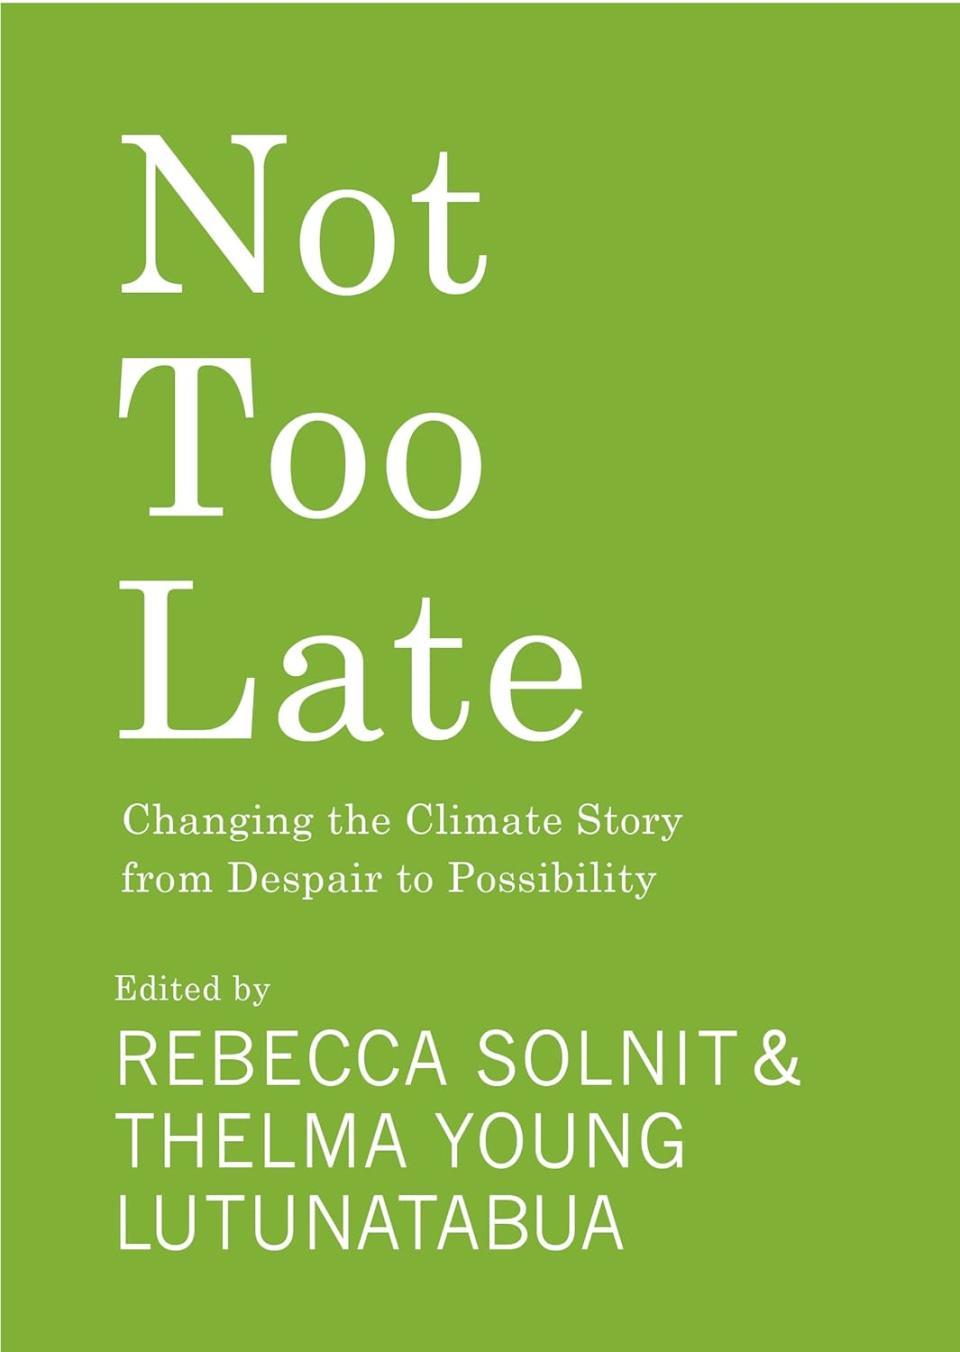 ‘Not Too Late: Changing the Climate Story from Despair to Possibility’ By Rebecca Solnit & Thelma Young Lutunatabua